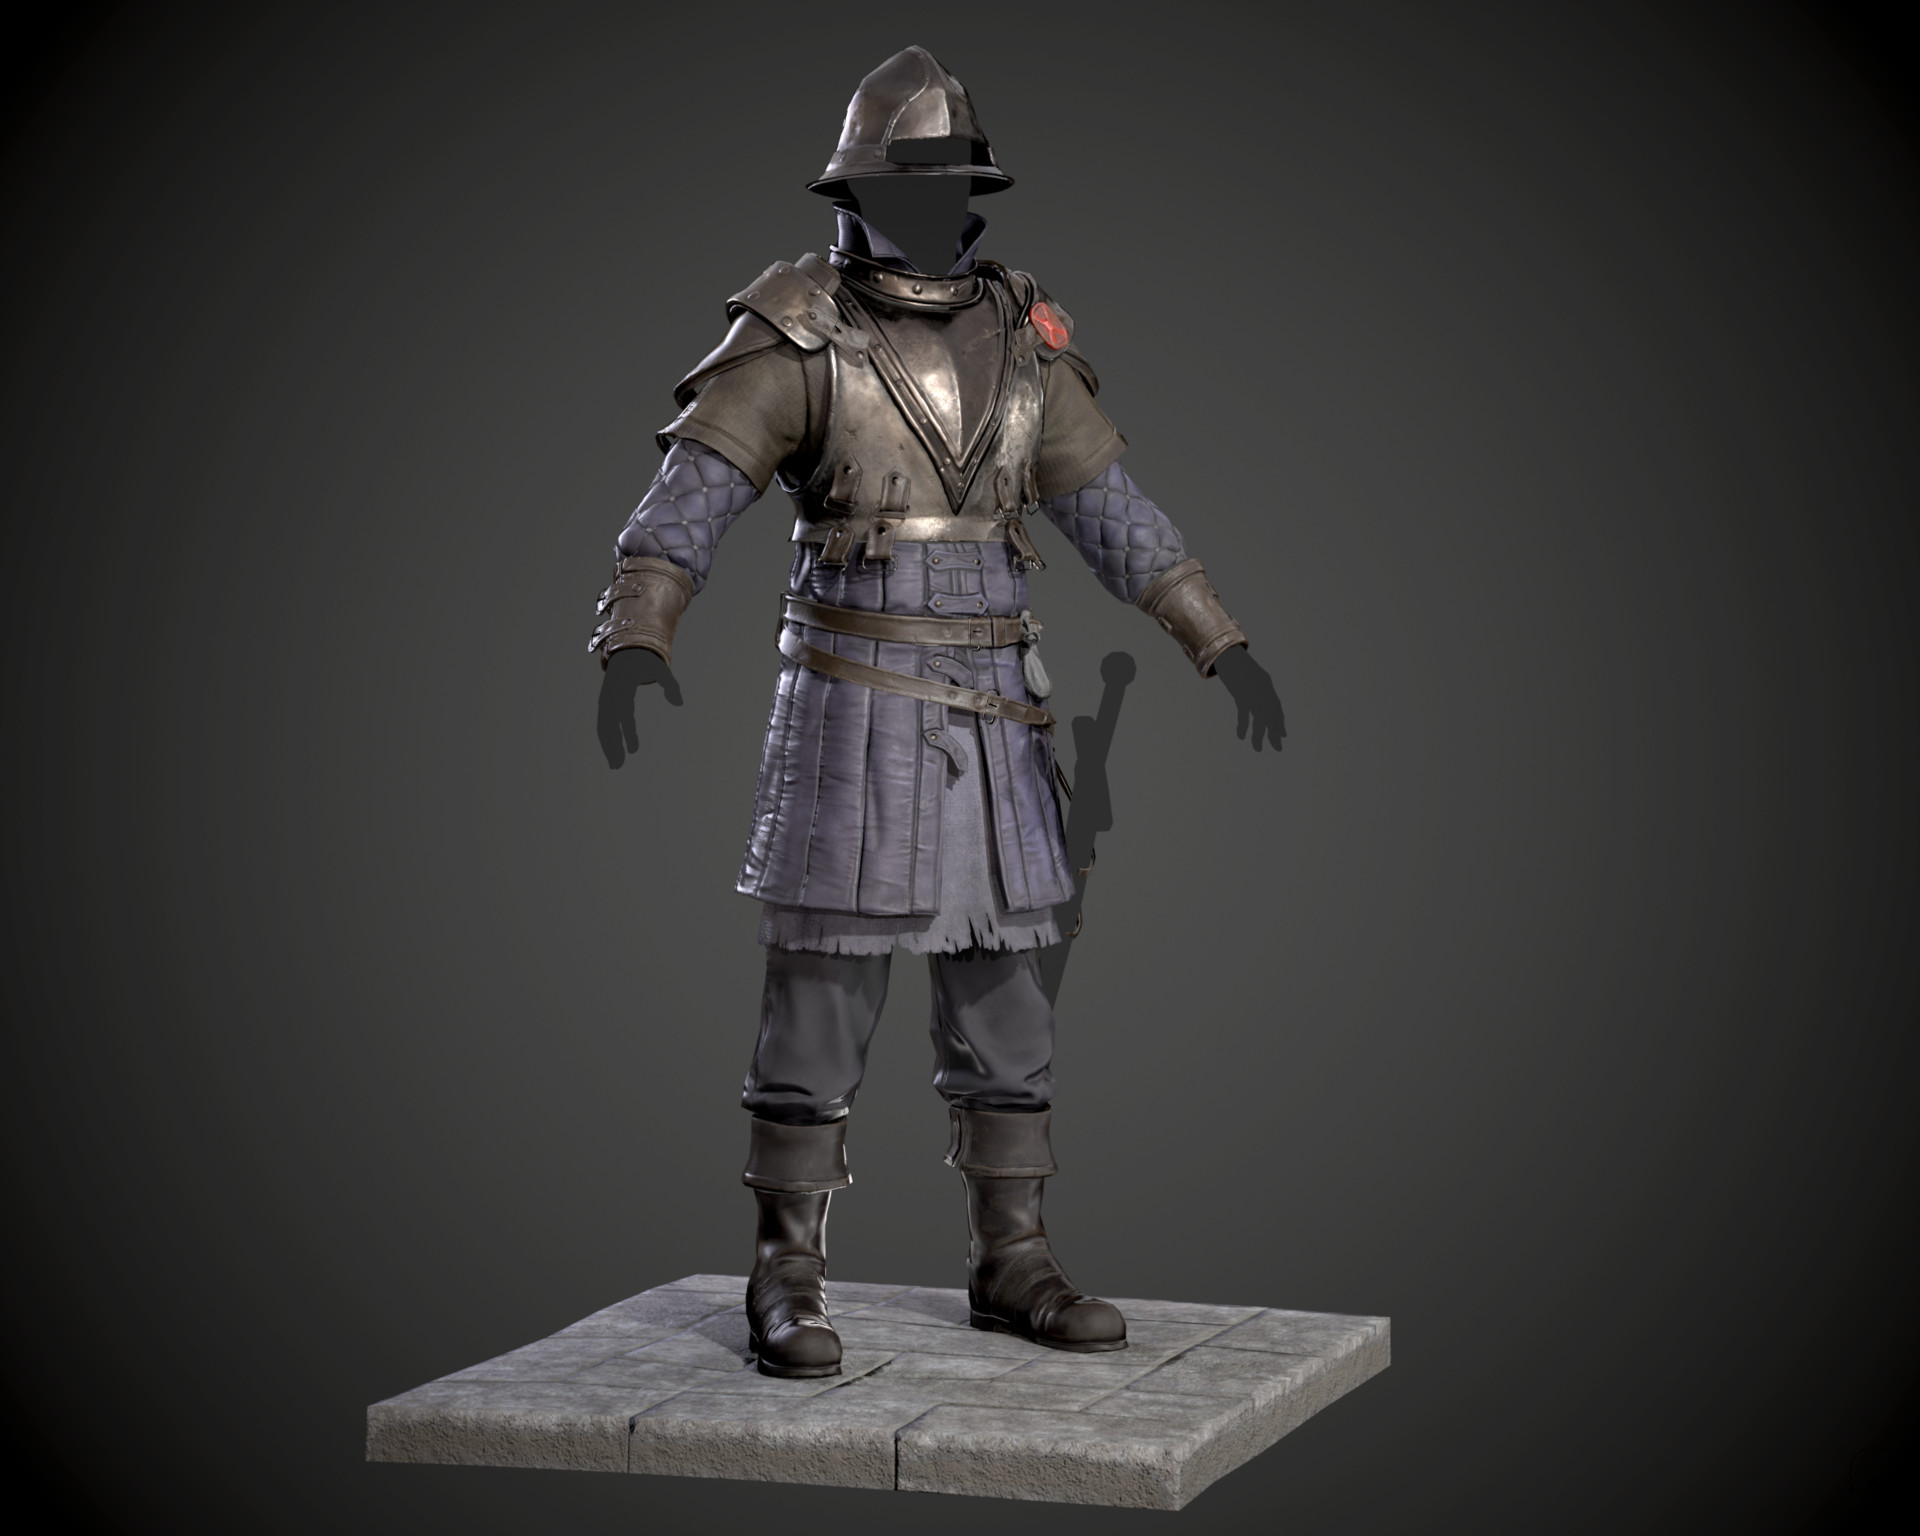 Knight Armor - Finished Projects - Blender Artists Community